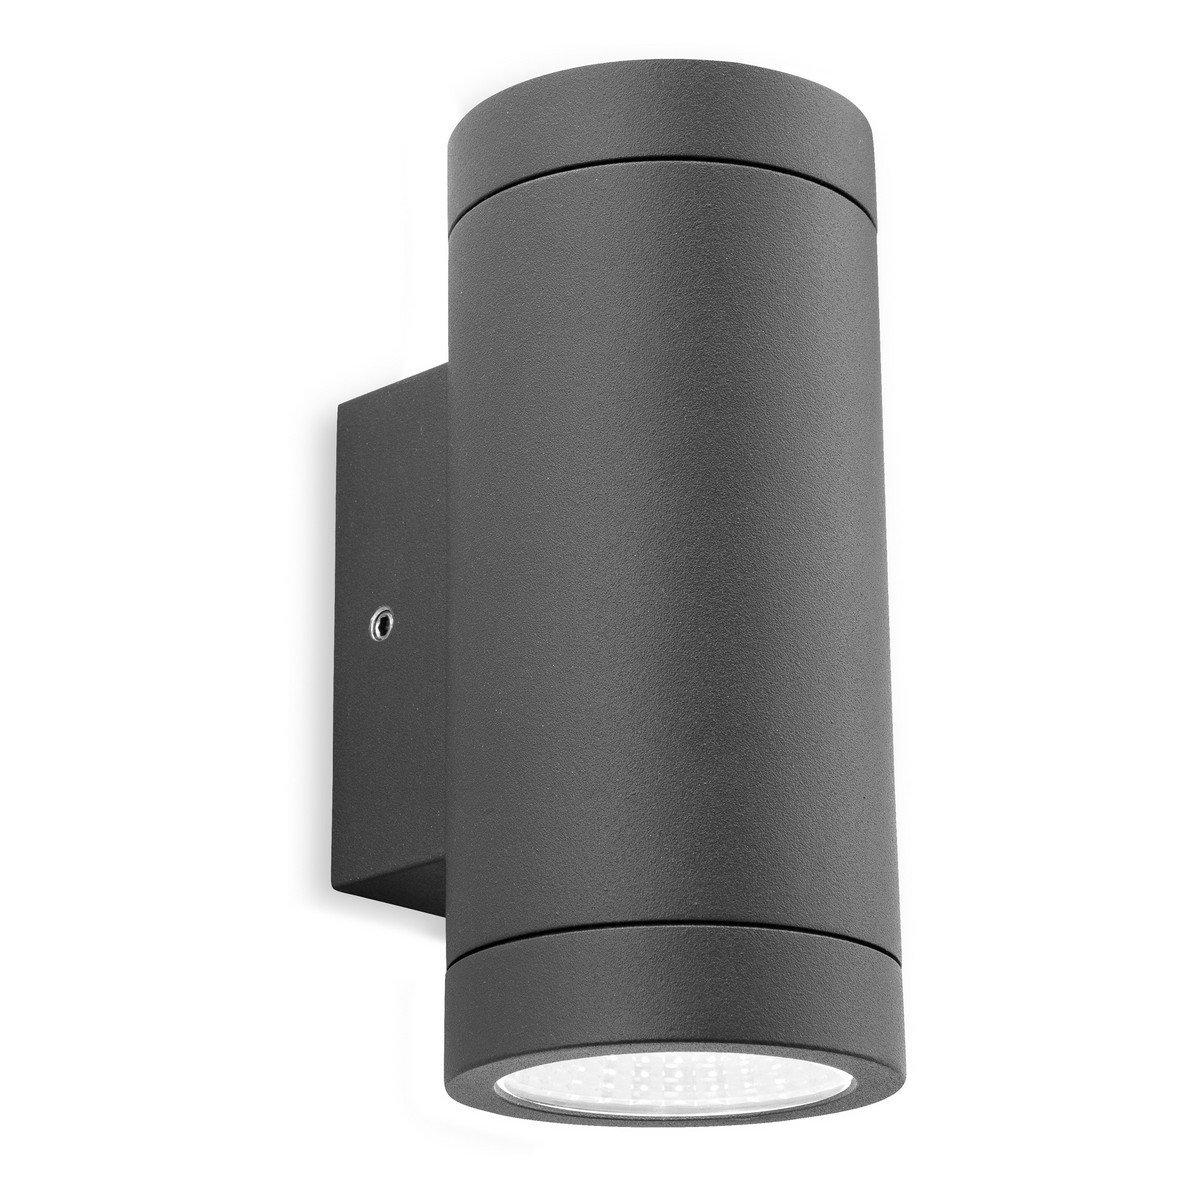 Shelby LED 2 Light Outdoor Up Down Wall Light Graphite IP65